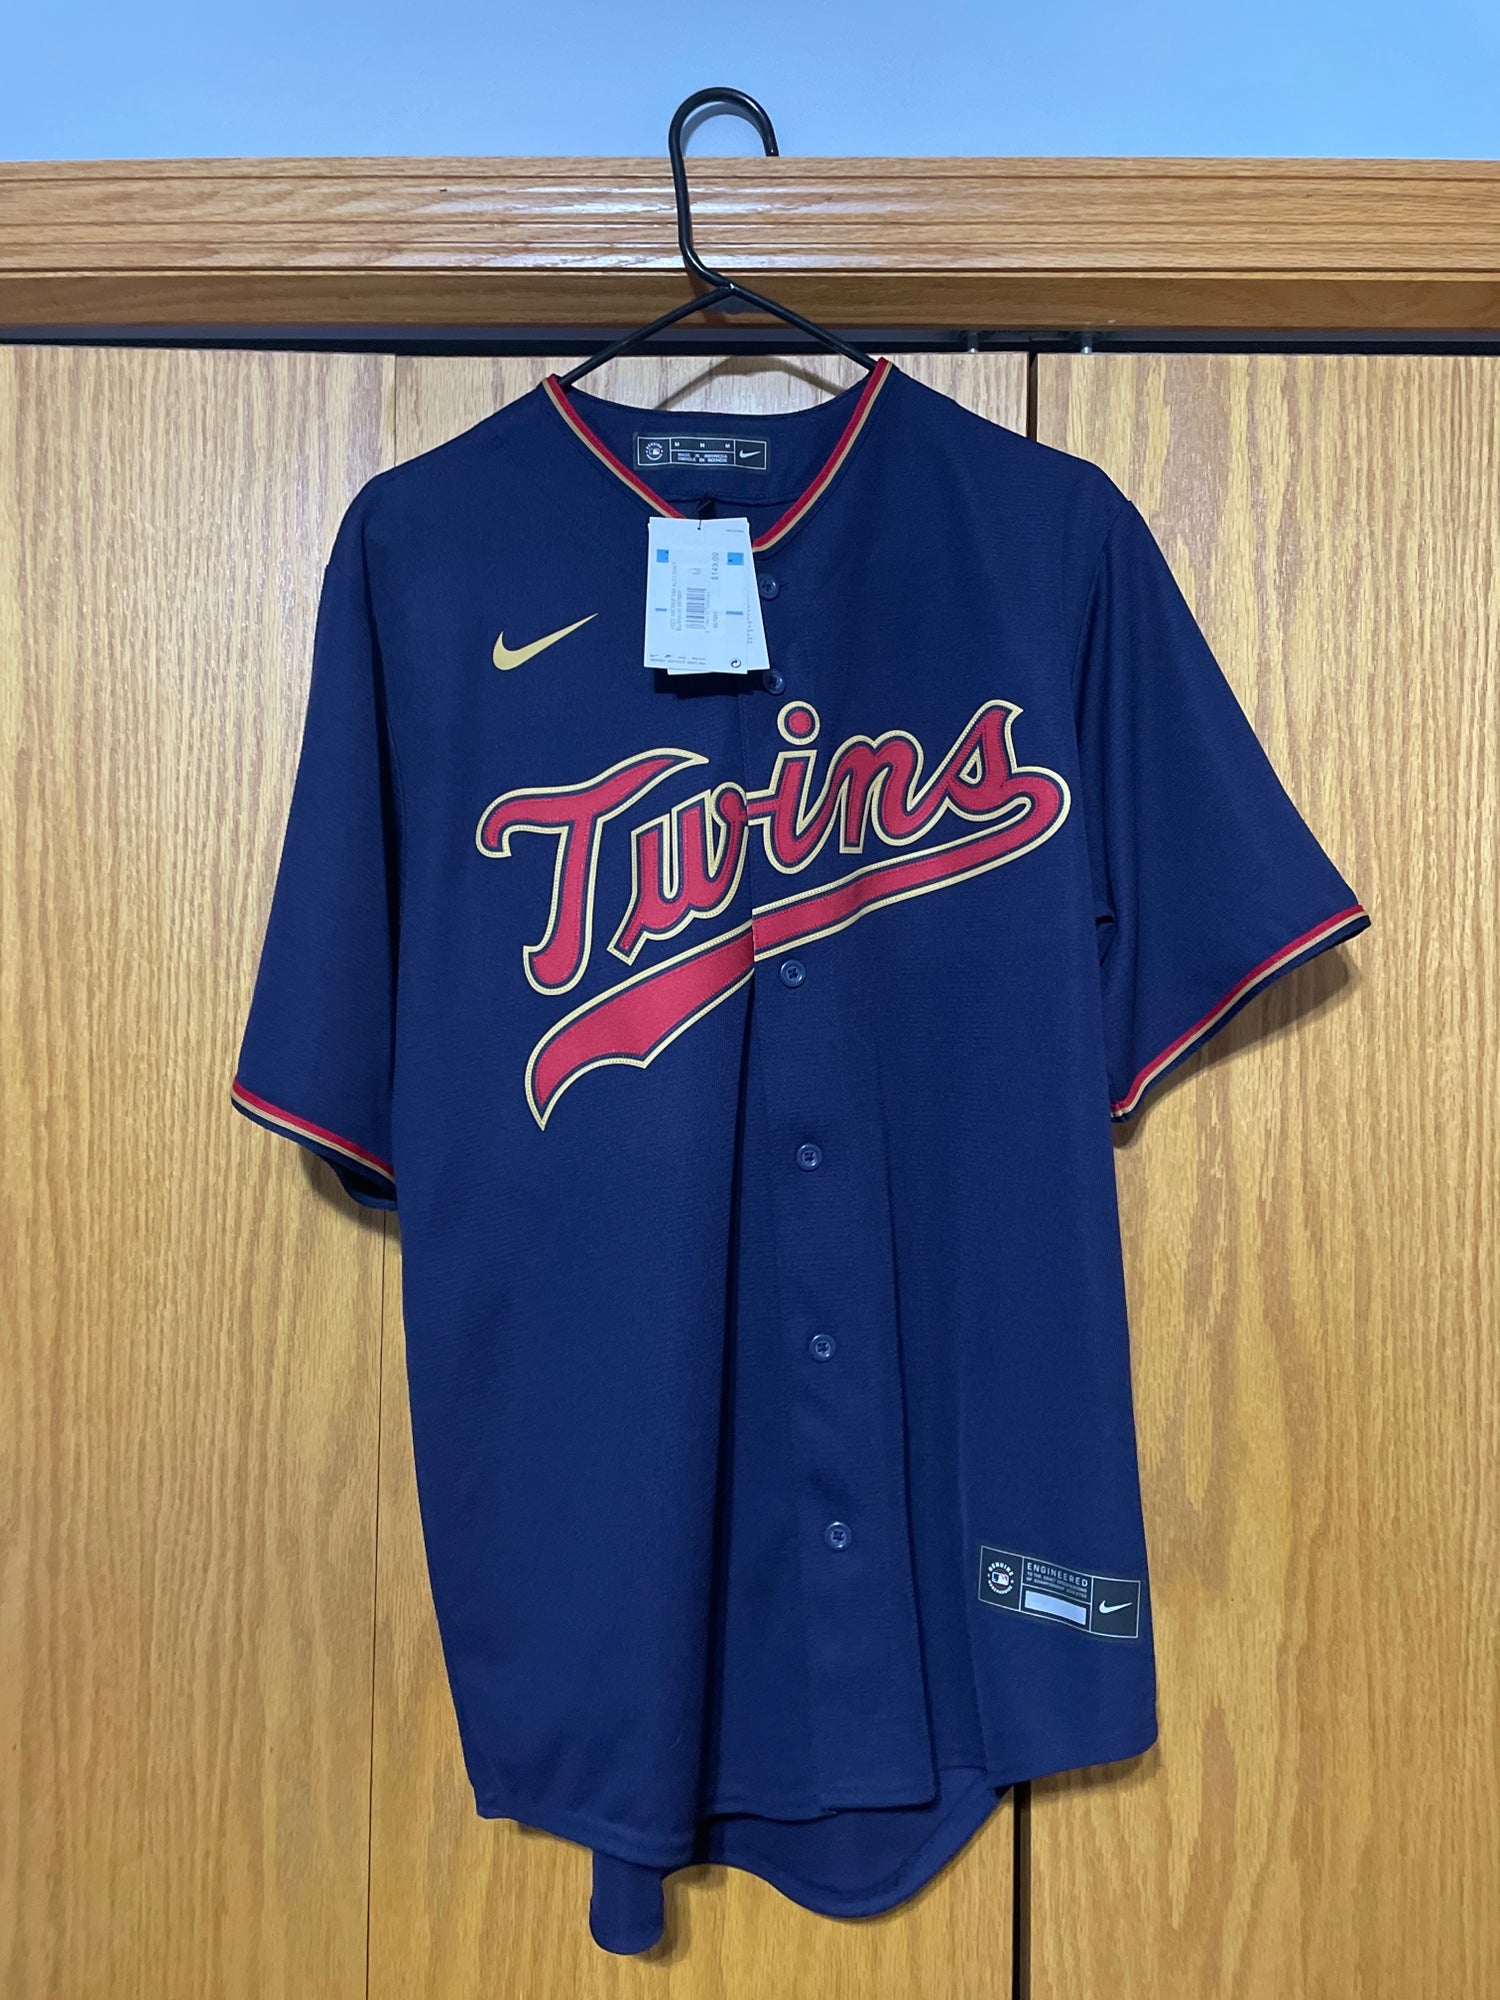 Minnesota Twins Nike Official Replica Home Jersey - Mens with